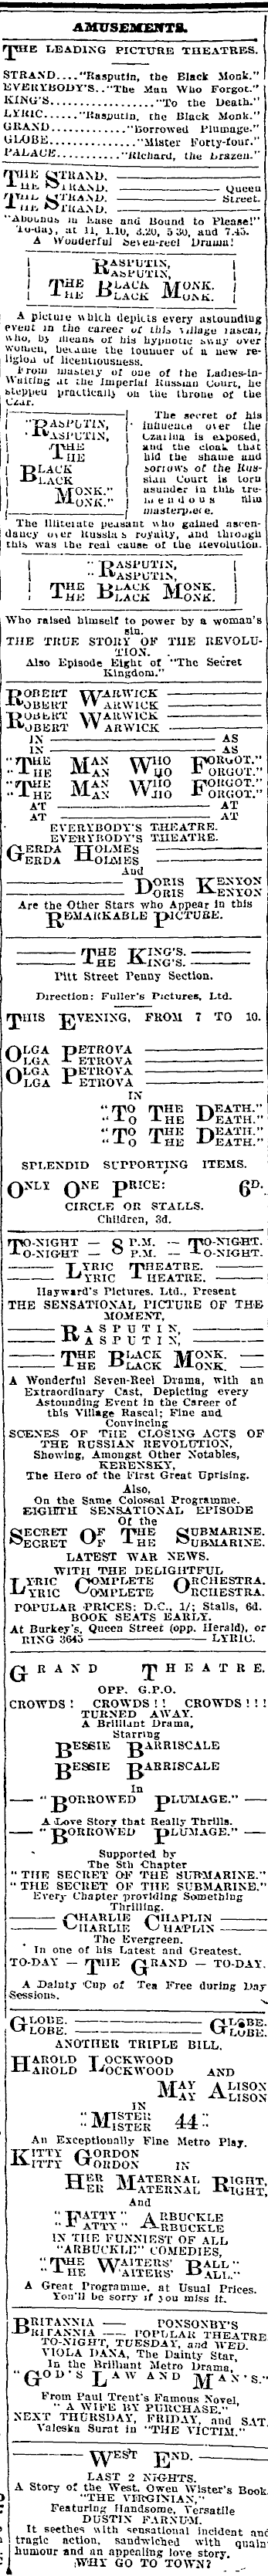 Papers Past Newspapers Auckland Star 10 December 1917 Page 8 Advertisements Column 7